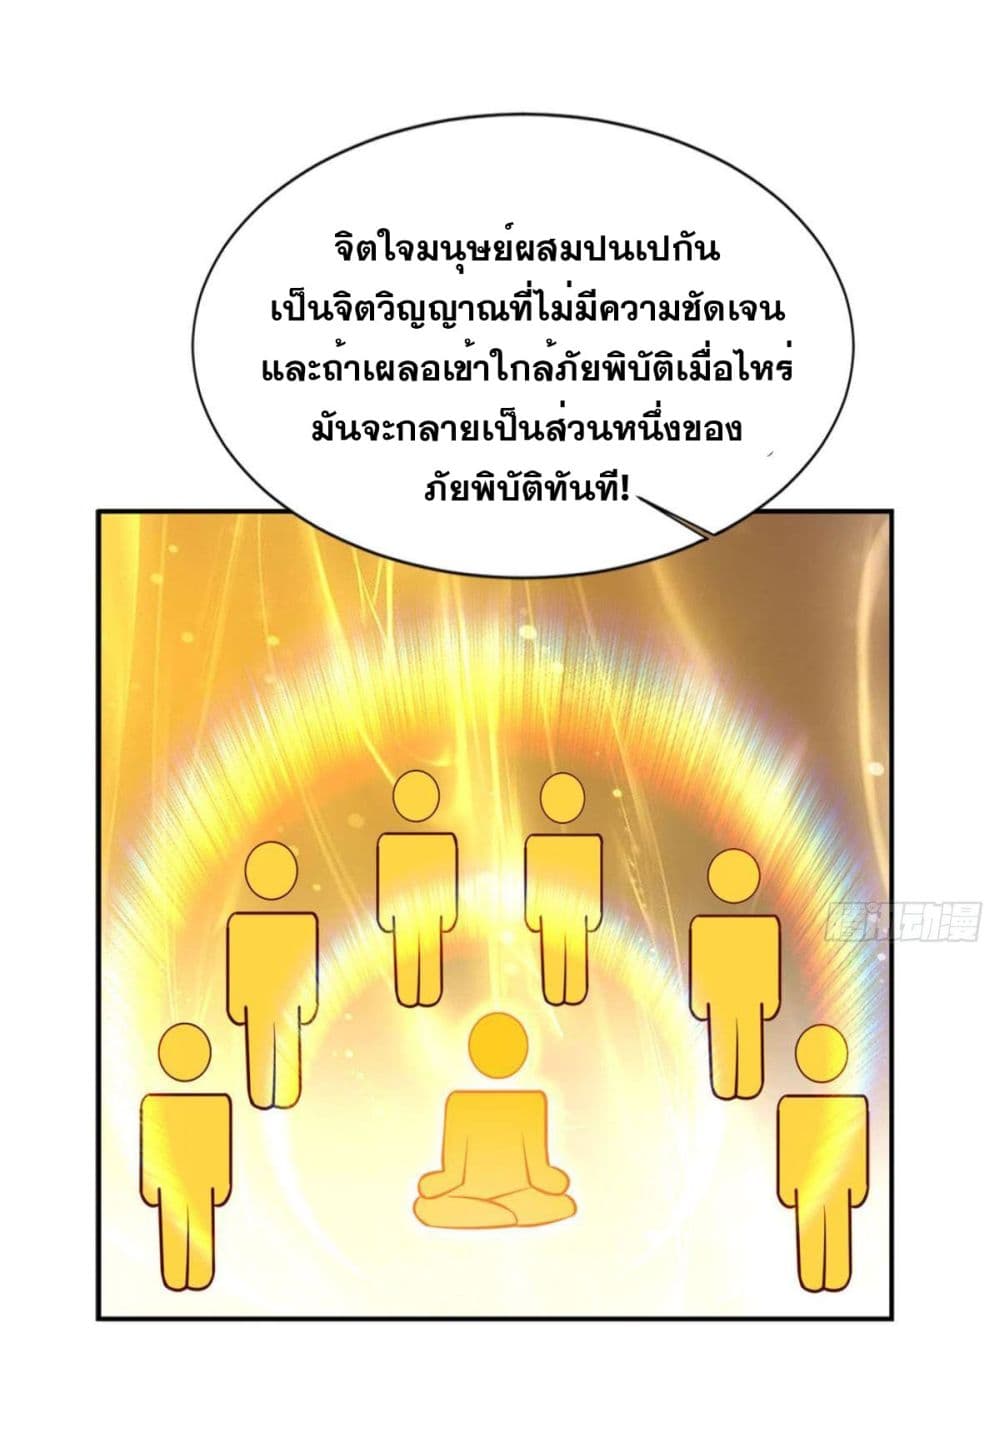 Solve the Crisis of Heaven 8 (30)